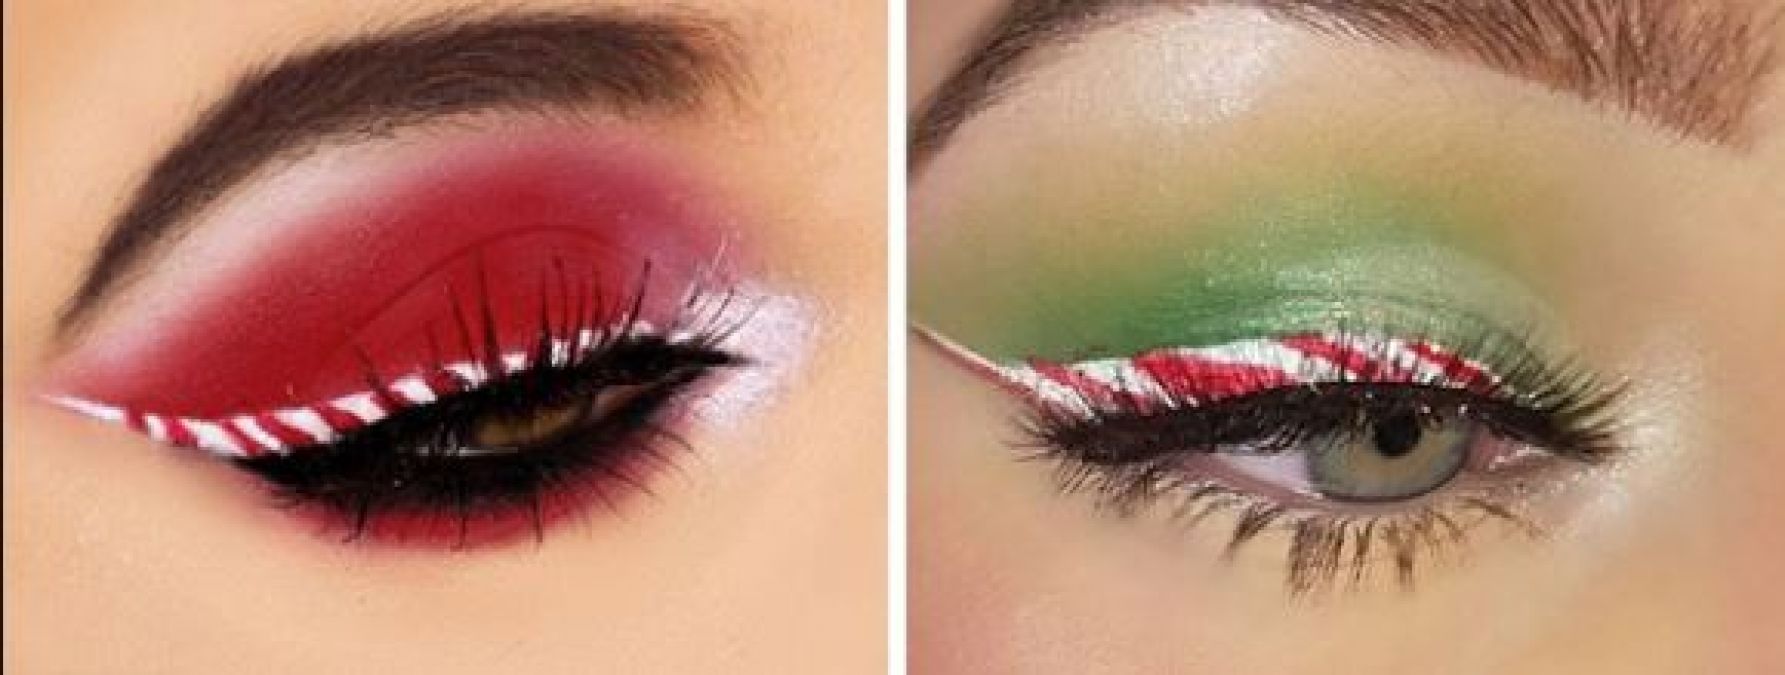 Make your eyes the most beautiful at Christmas